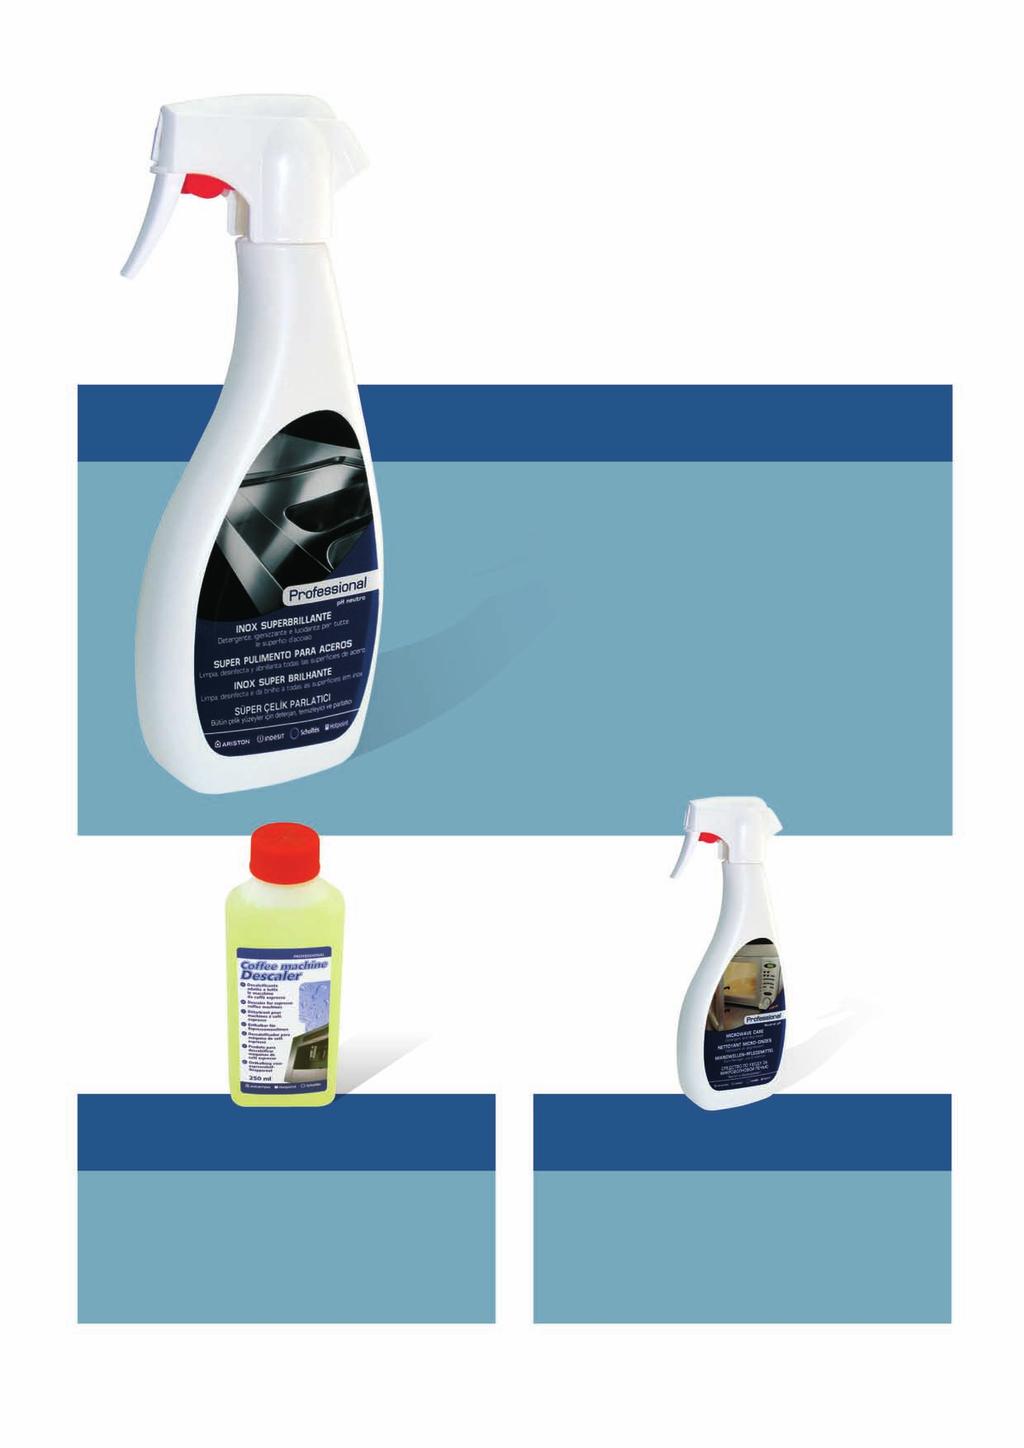 Super Steel Polish Care Spray Cleans and disinfects all stainless steel surfaces.